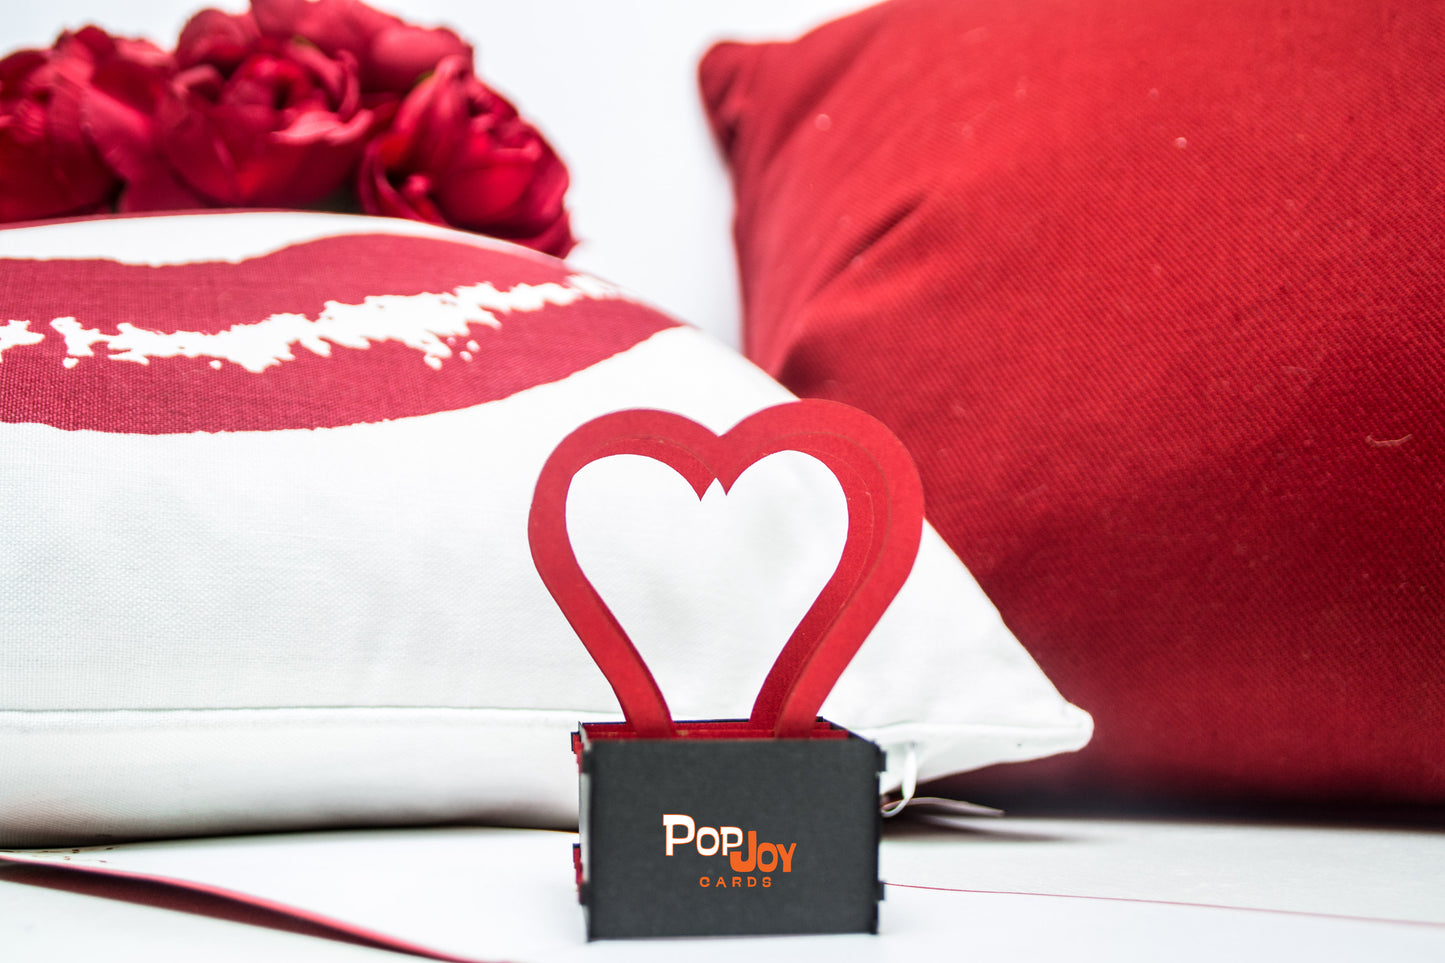 Pop-up card featuring three red heart-shaped arcs popping out of a black box in the middle, with the card set in front of white and red pillows